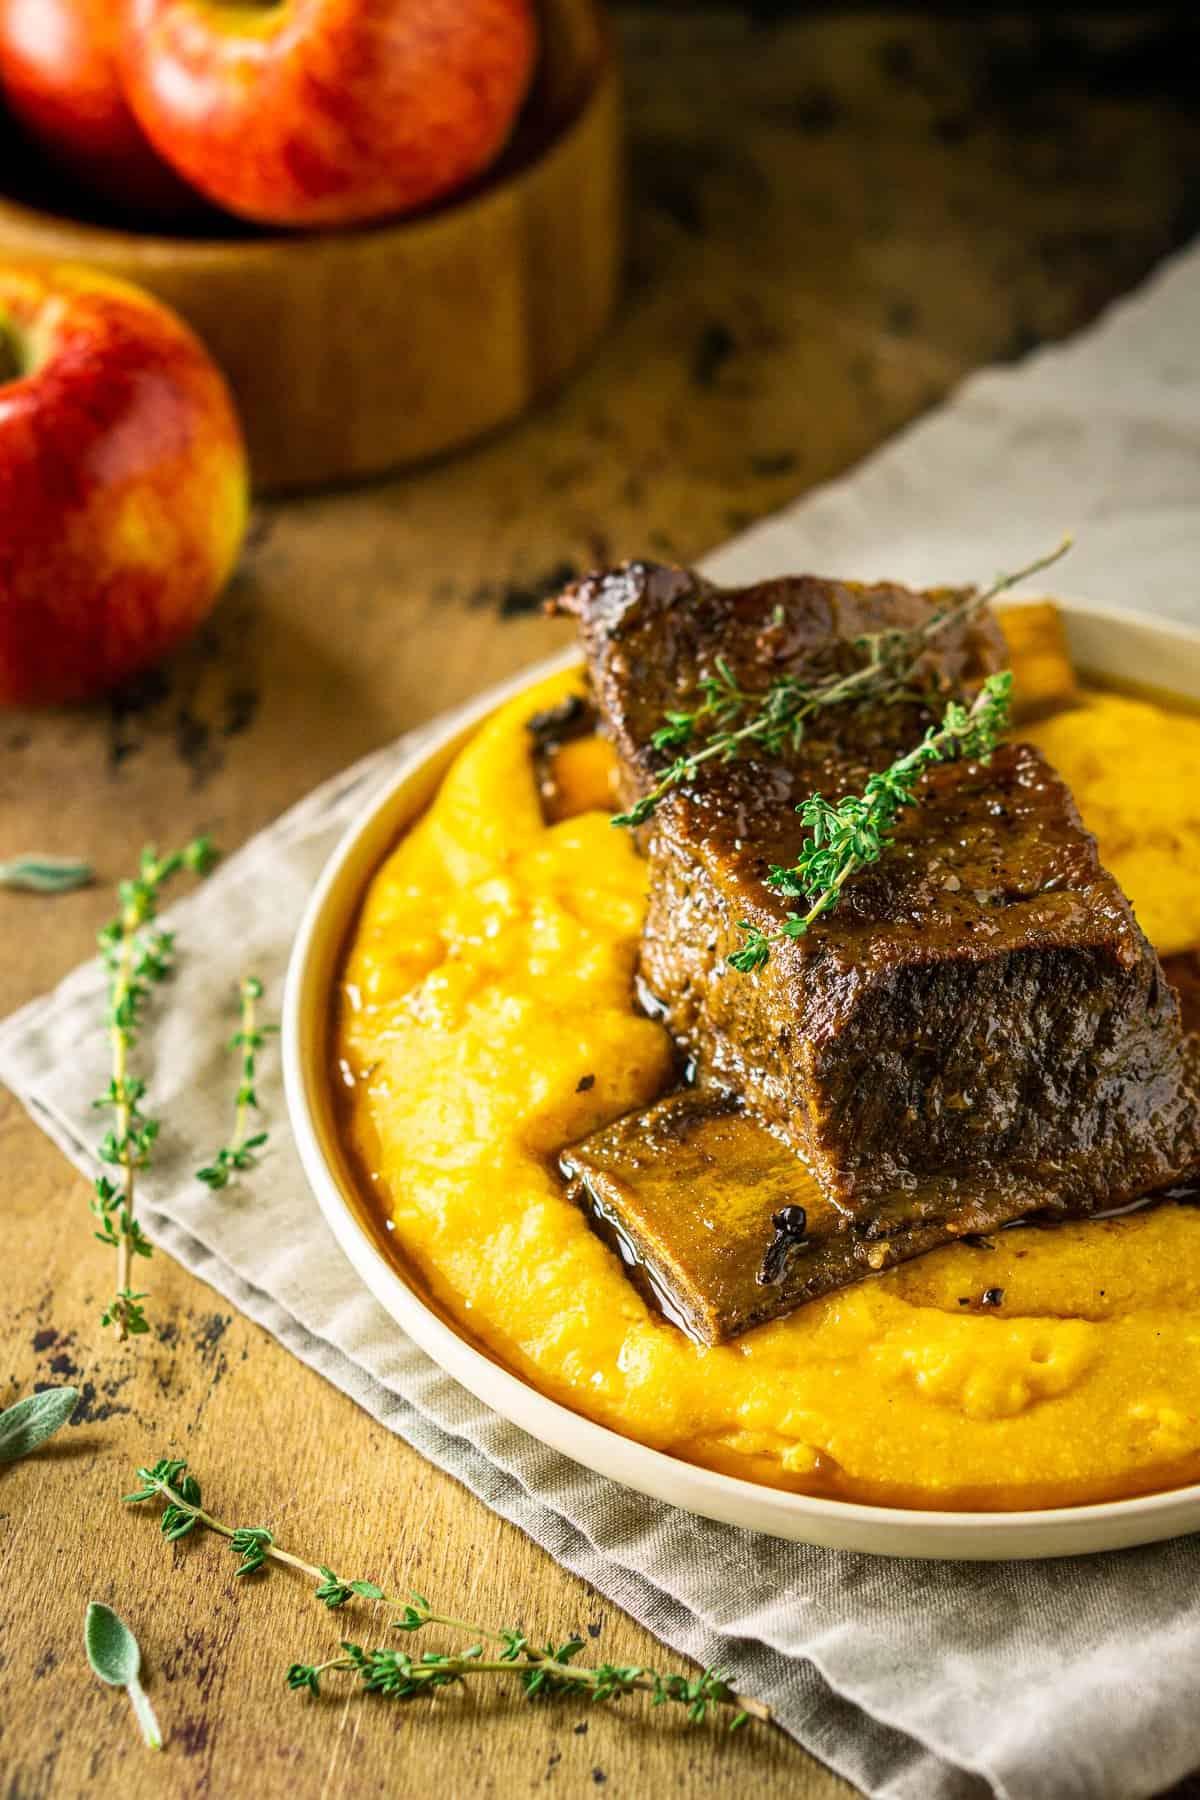 A side view of two apple cider short ribs with a wooden bowl of apples behind it.